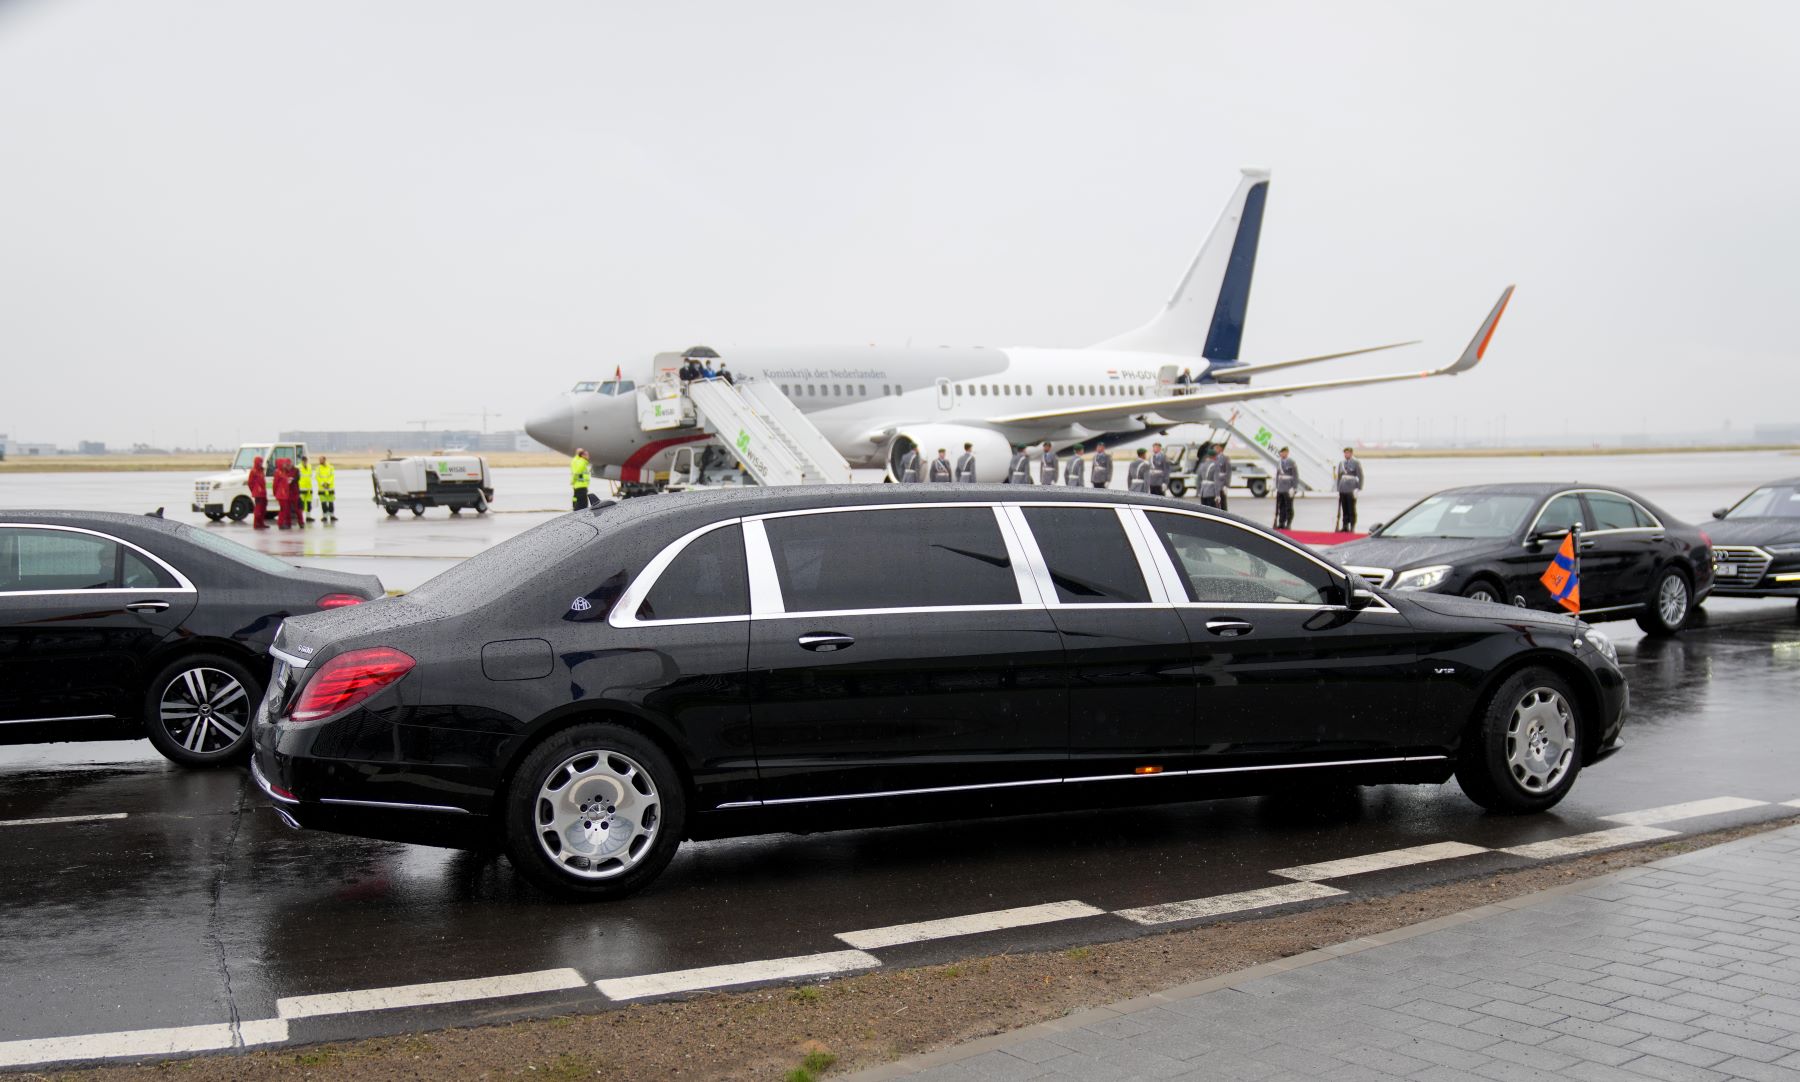 A limo/limousine for King Willem-Alexander of the Netherlands and Queen Maxima at the Berlin Brandenburg Airport in Germany